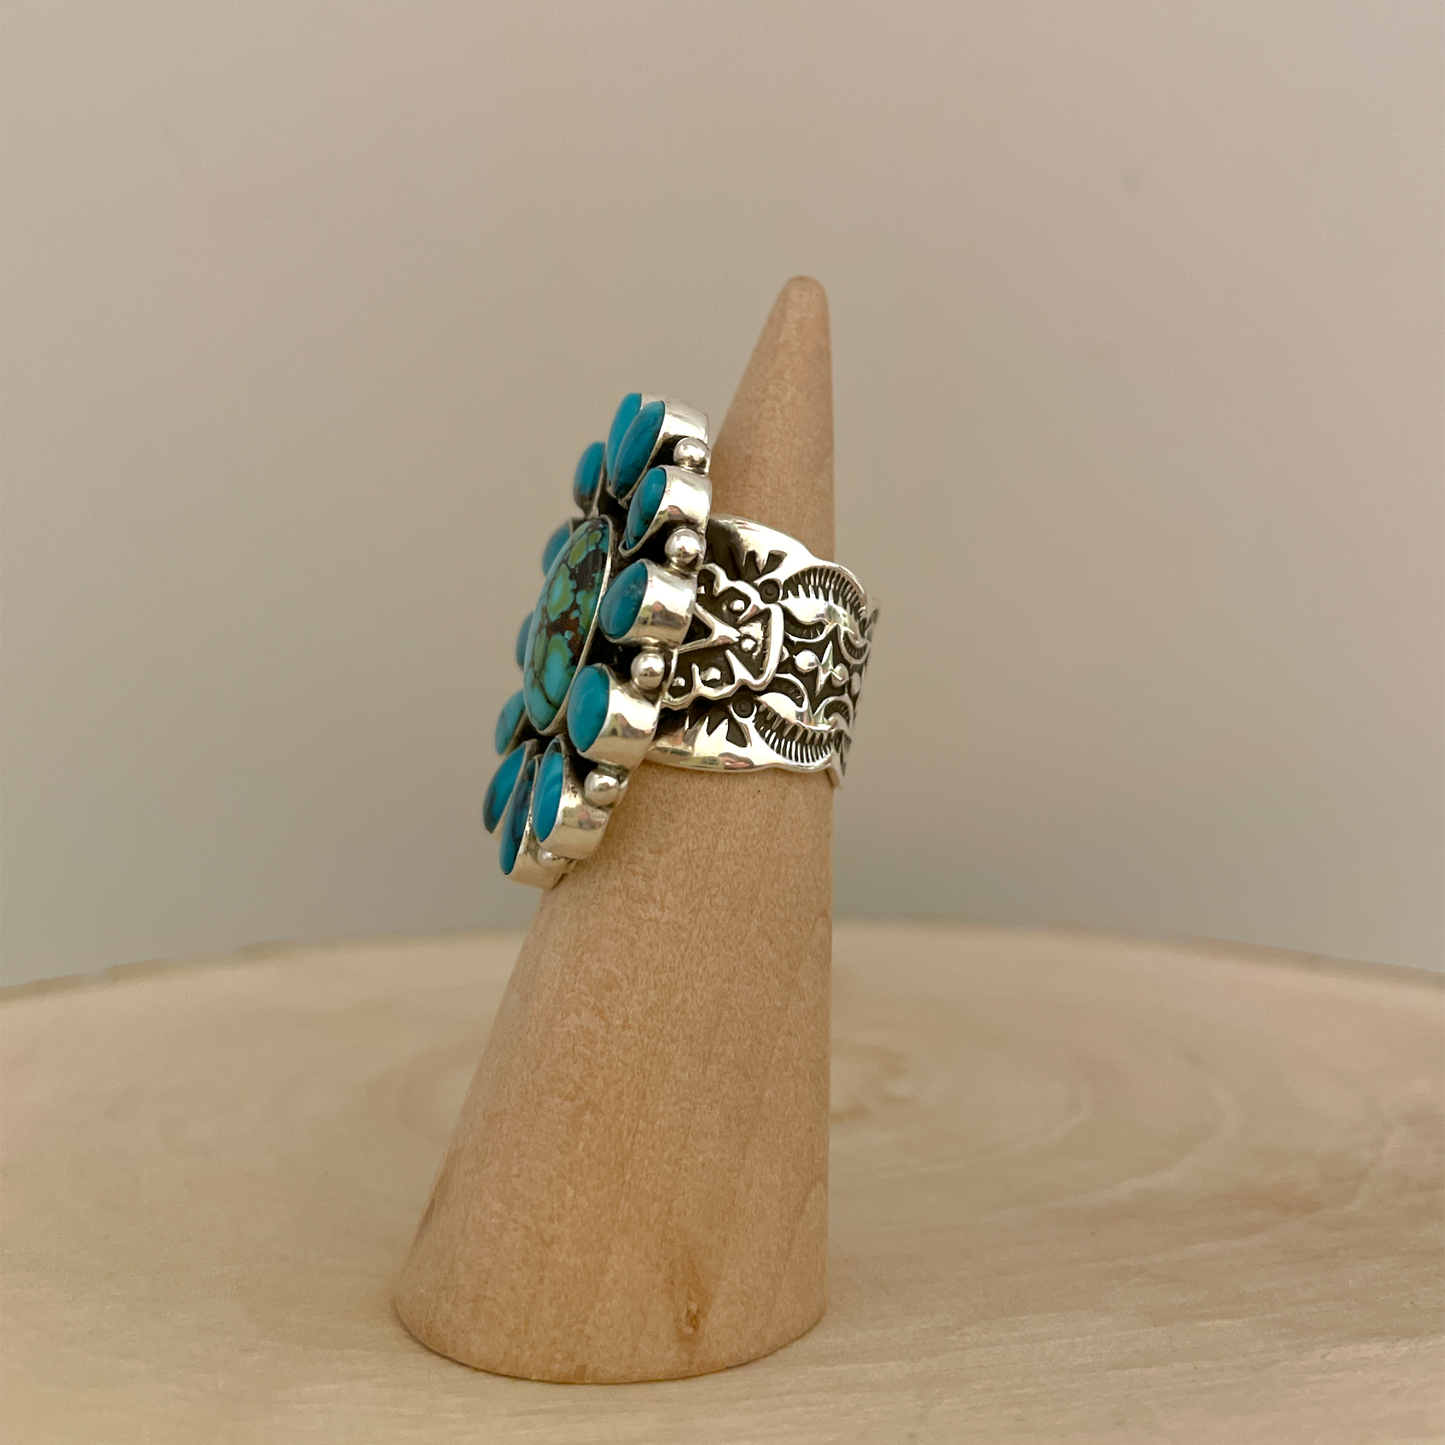 Turquoise Cluster Ring Size 6.5 By Darrell Cadman